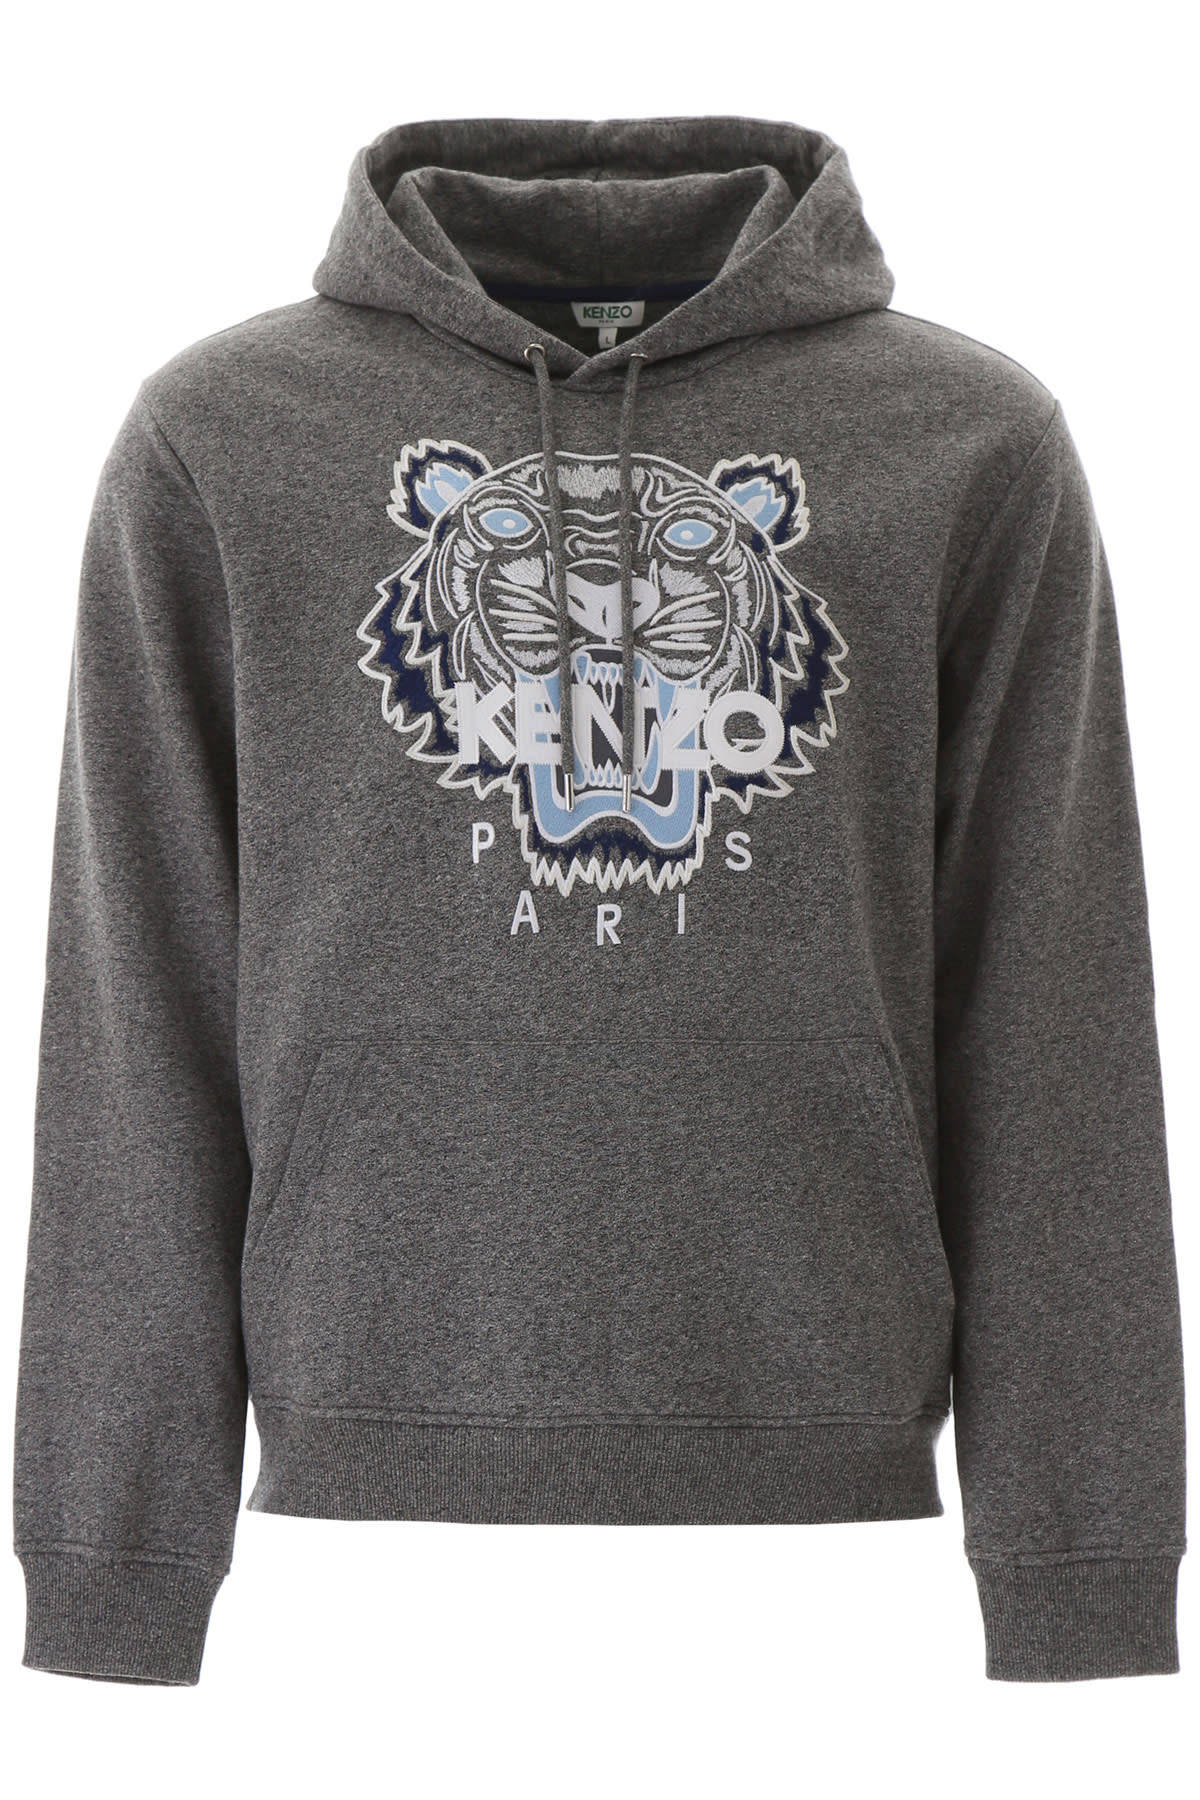 KENZO TIGER EMBROIDERY HOODIE,11205172